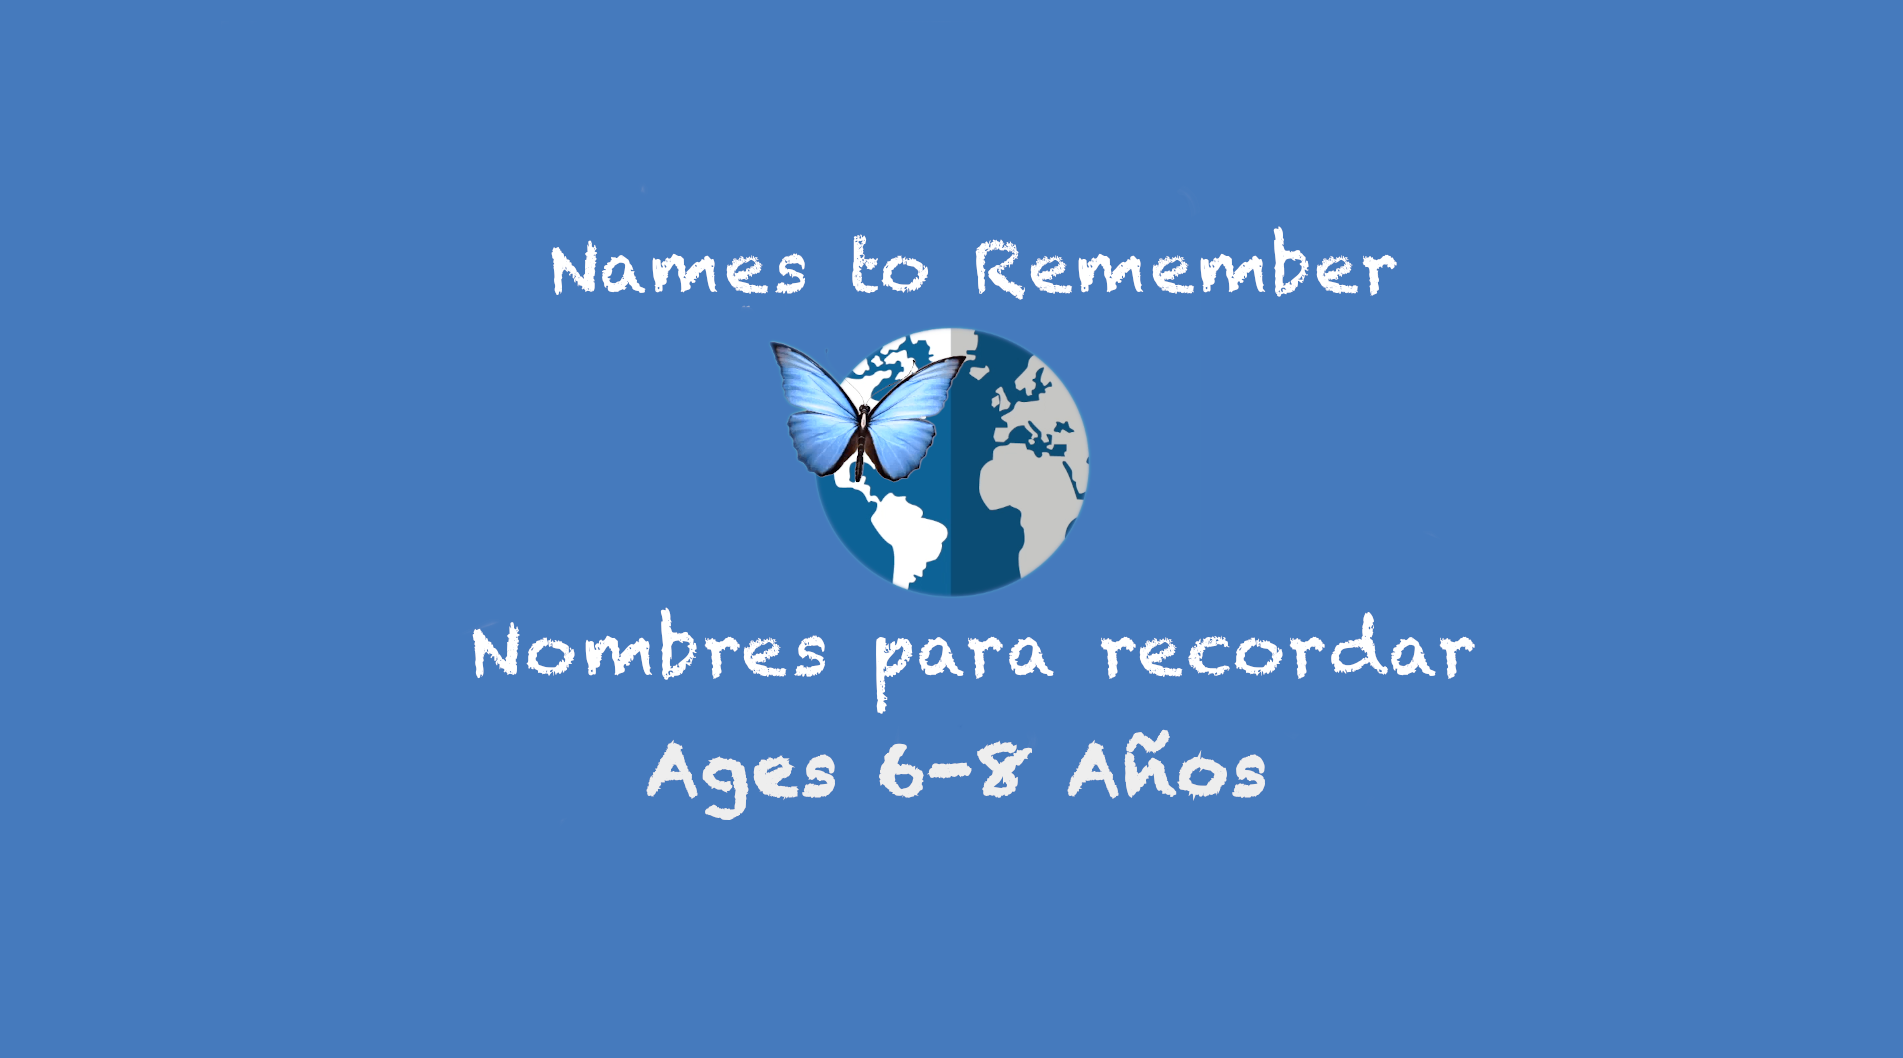 Names to Remember for 6-8 year olds